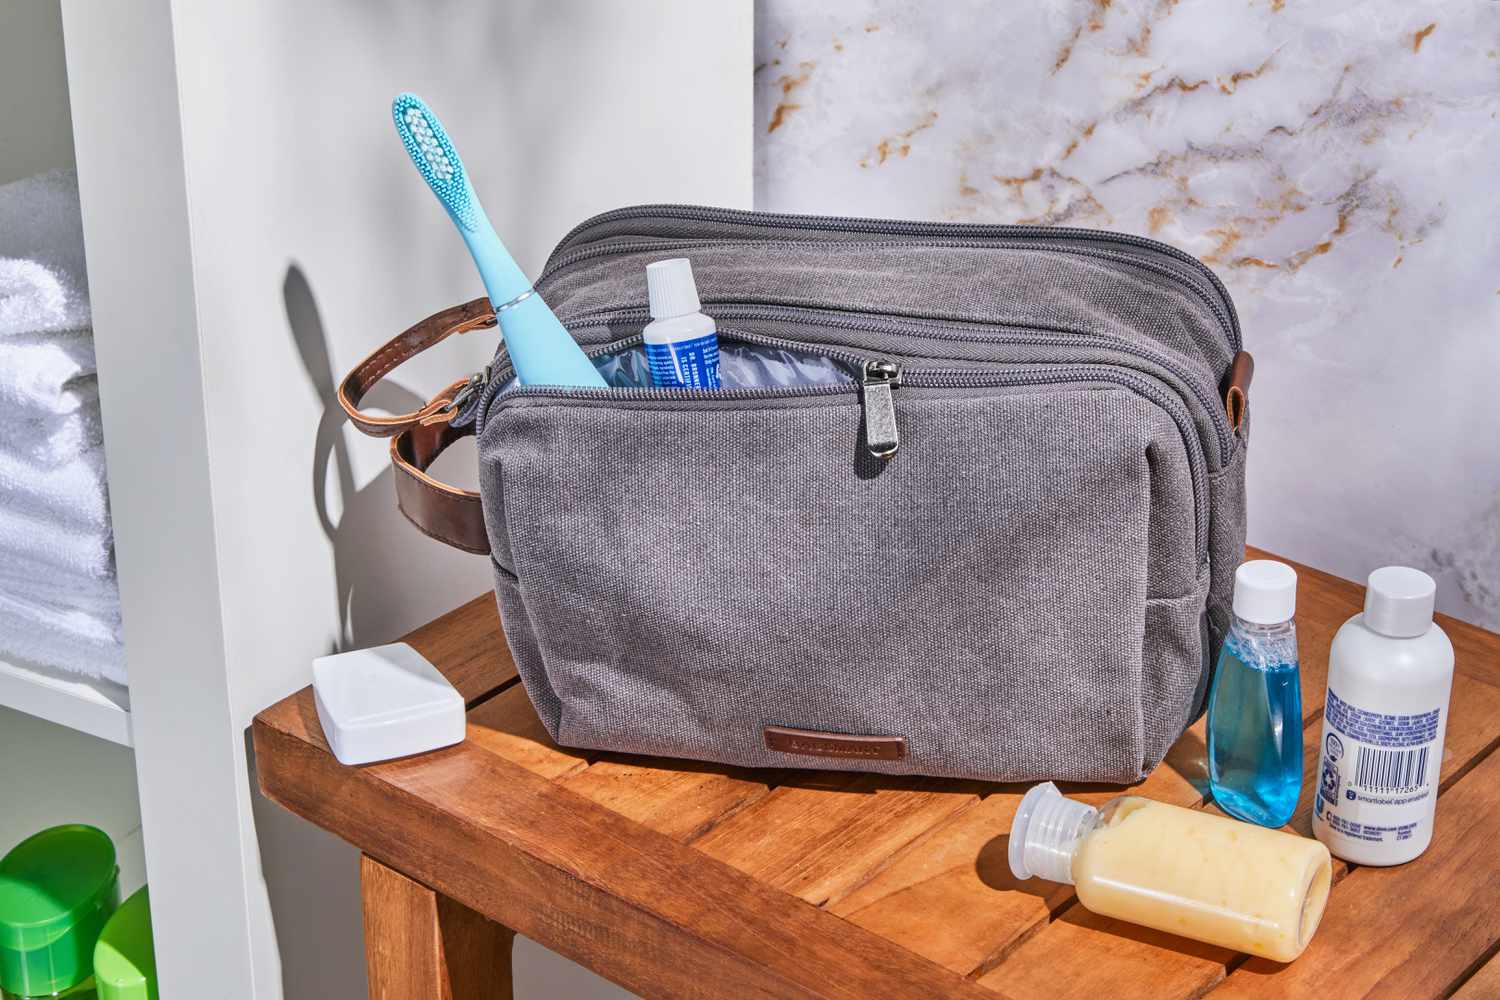 Where Can You Find a High-Quality Toiletry Bag?